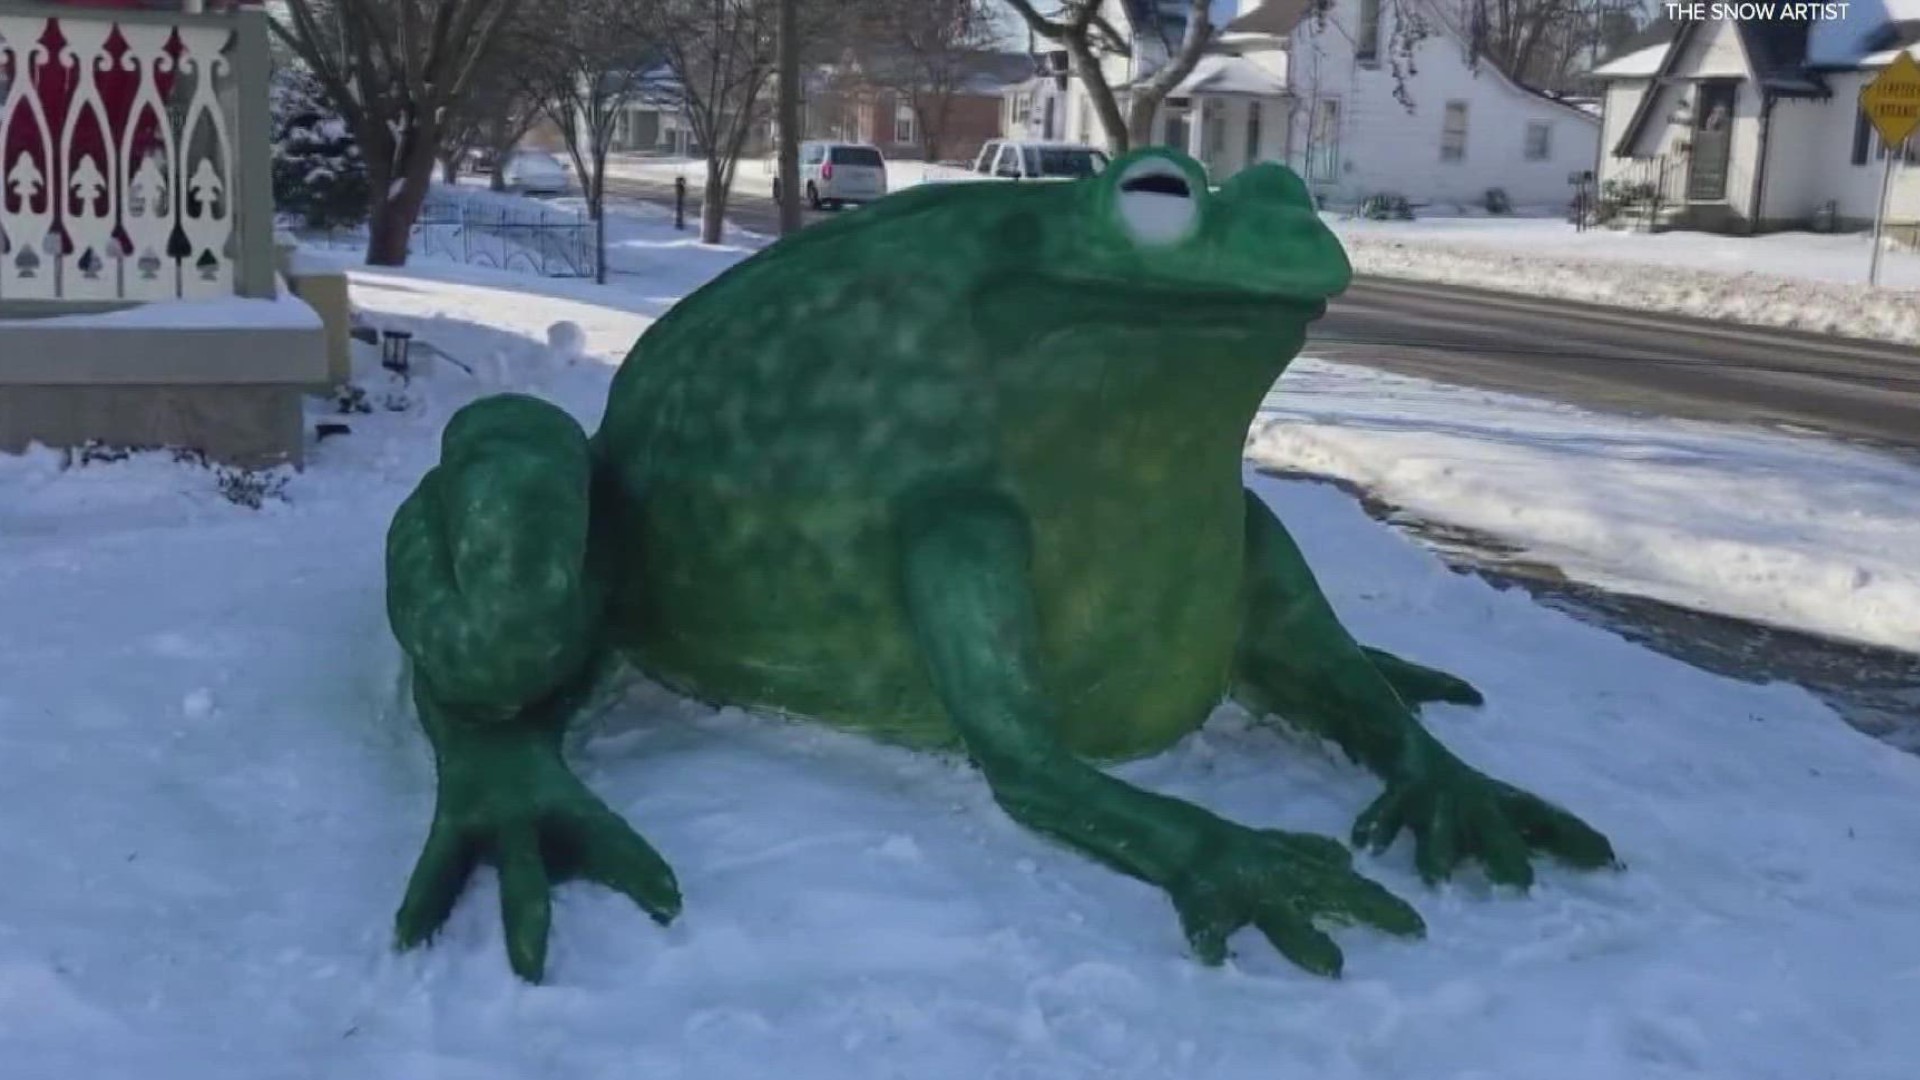 This year Rick Horton wasn't sure what to make, then it came to him: A massive bullfrog inspired by childhood memories of catching frogs at Brandywine Creek.